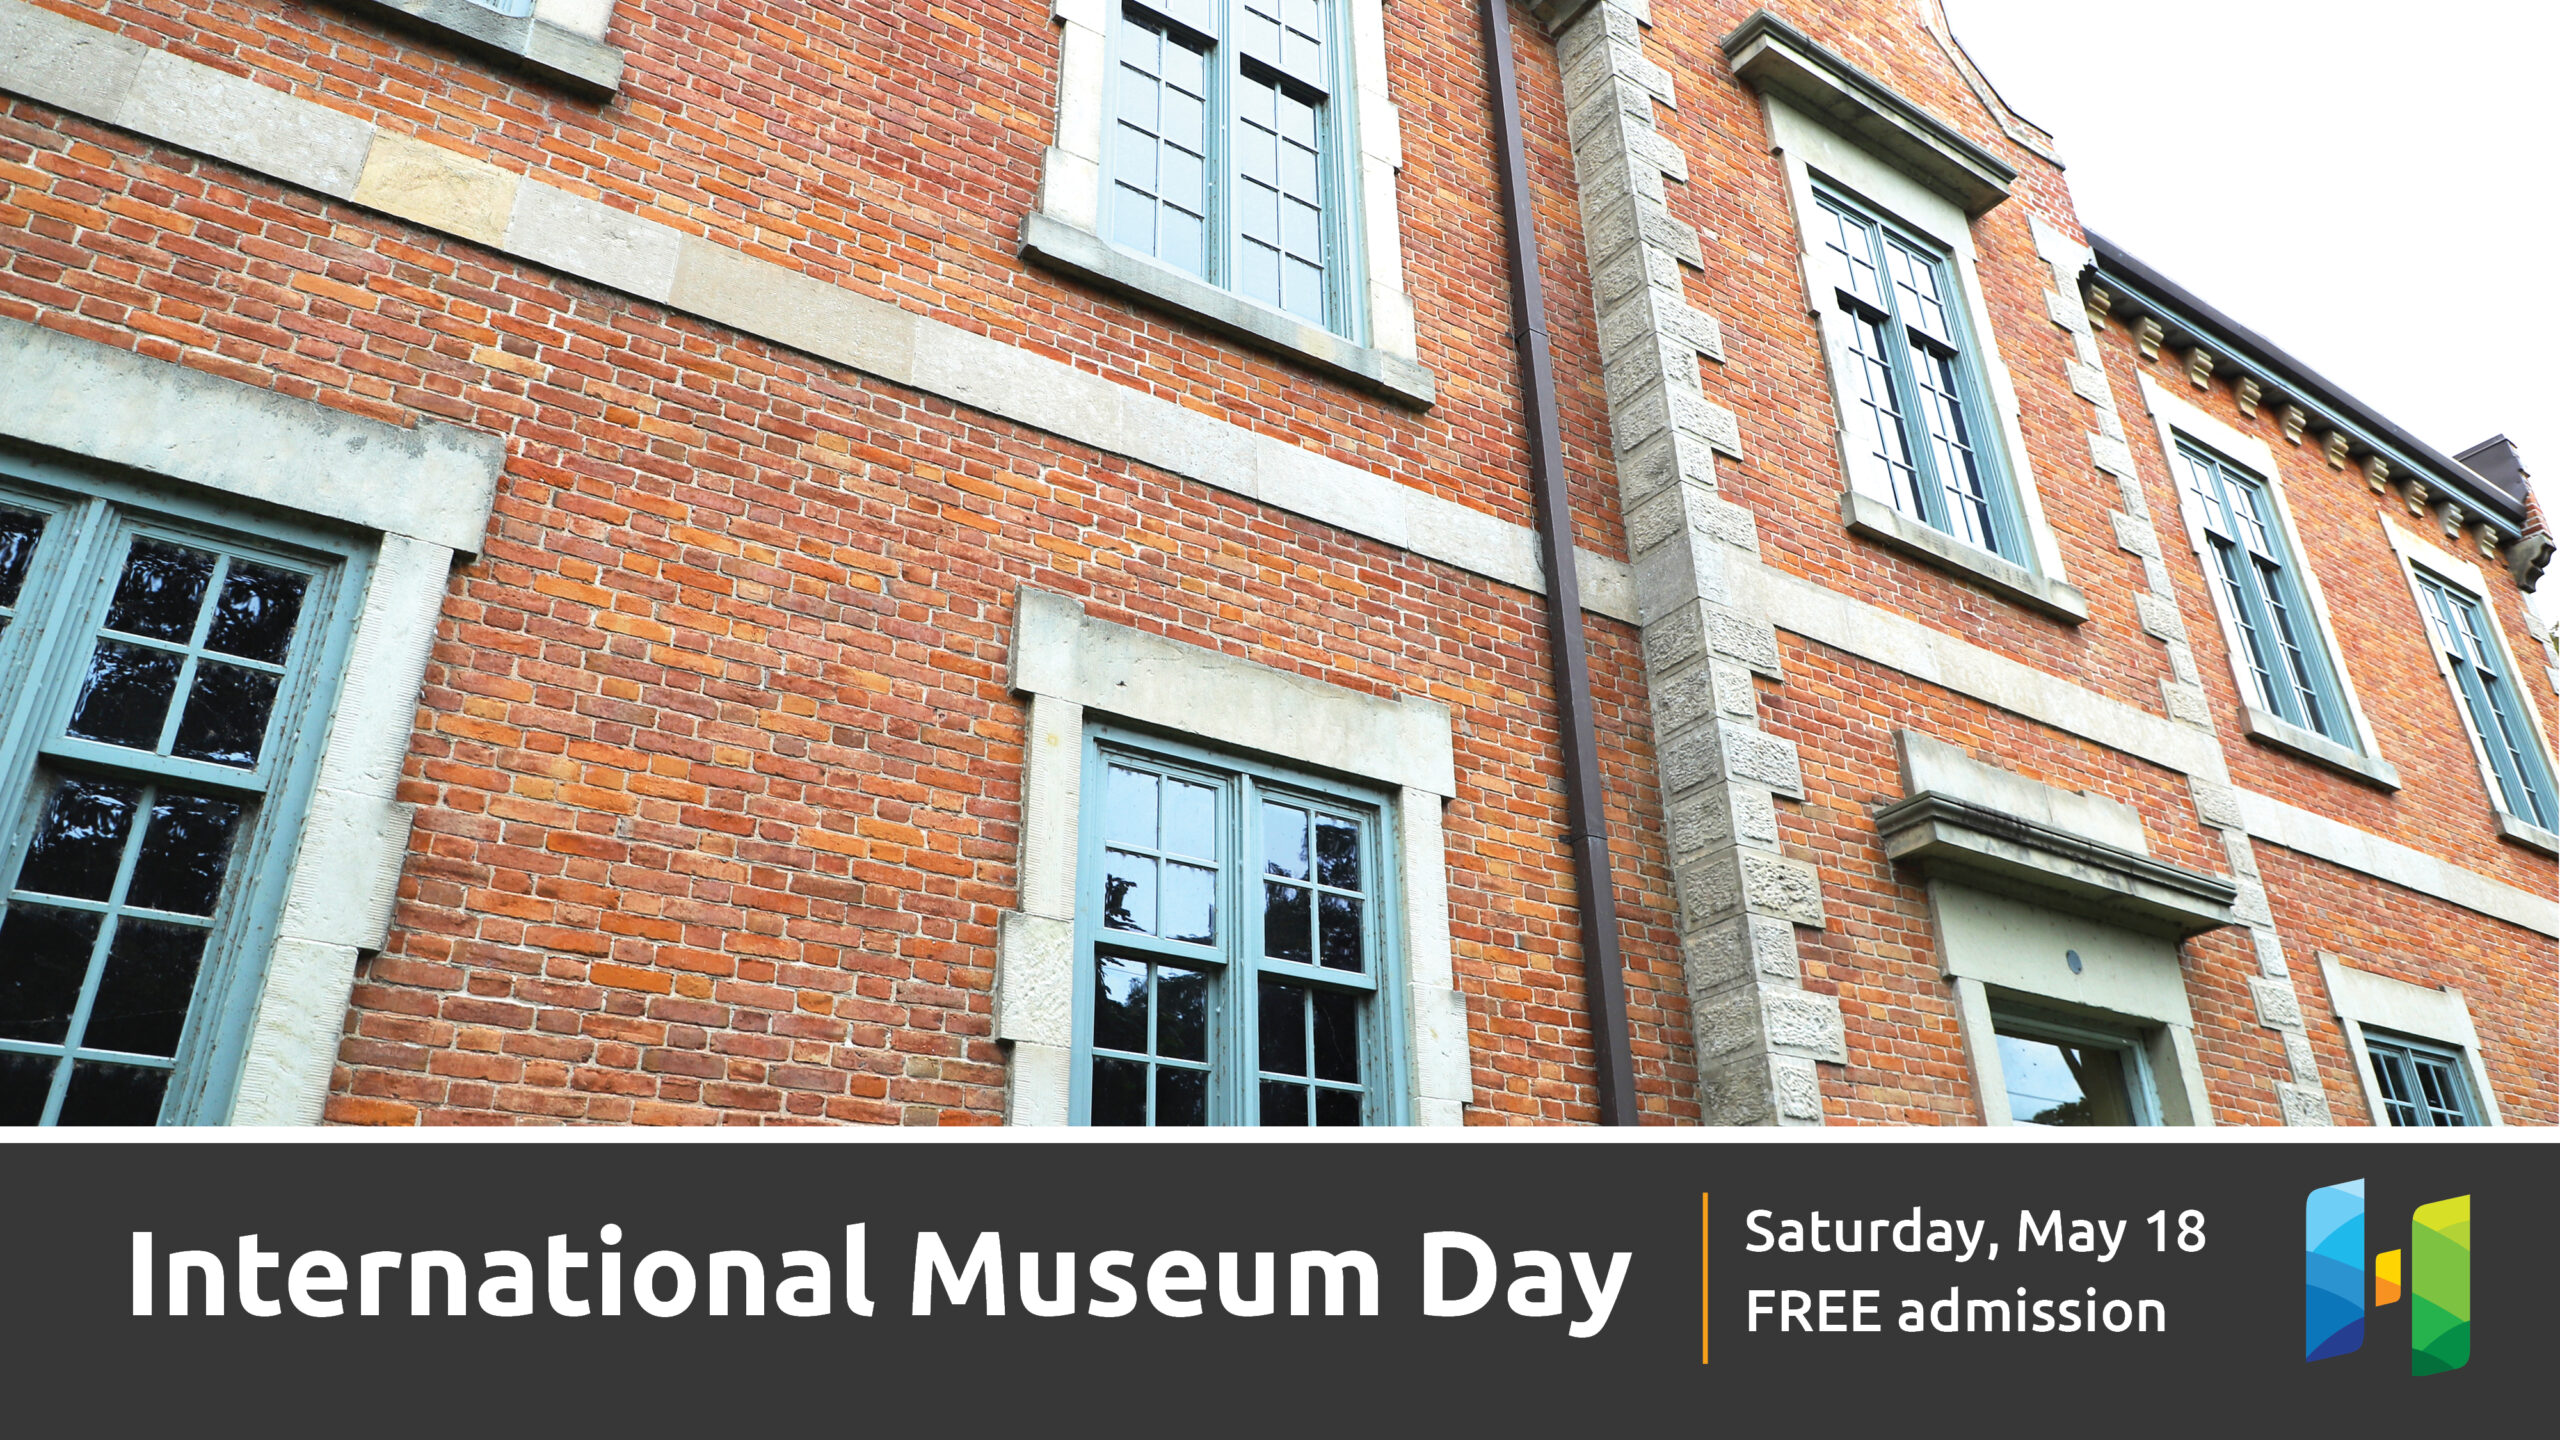 Photo of the Huron County Museum with text promoting International Museum Day